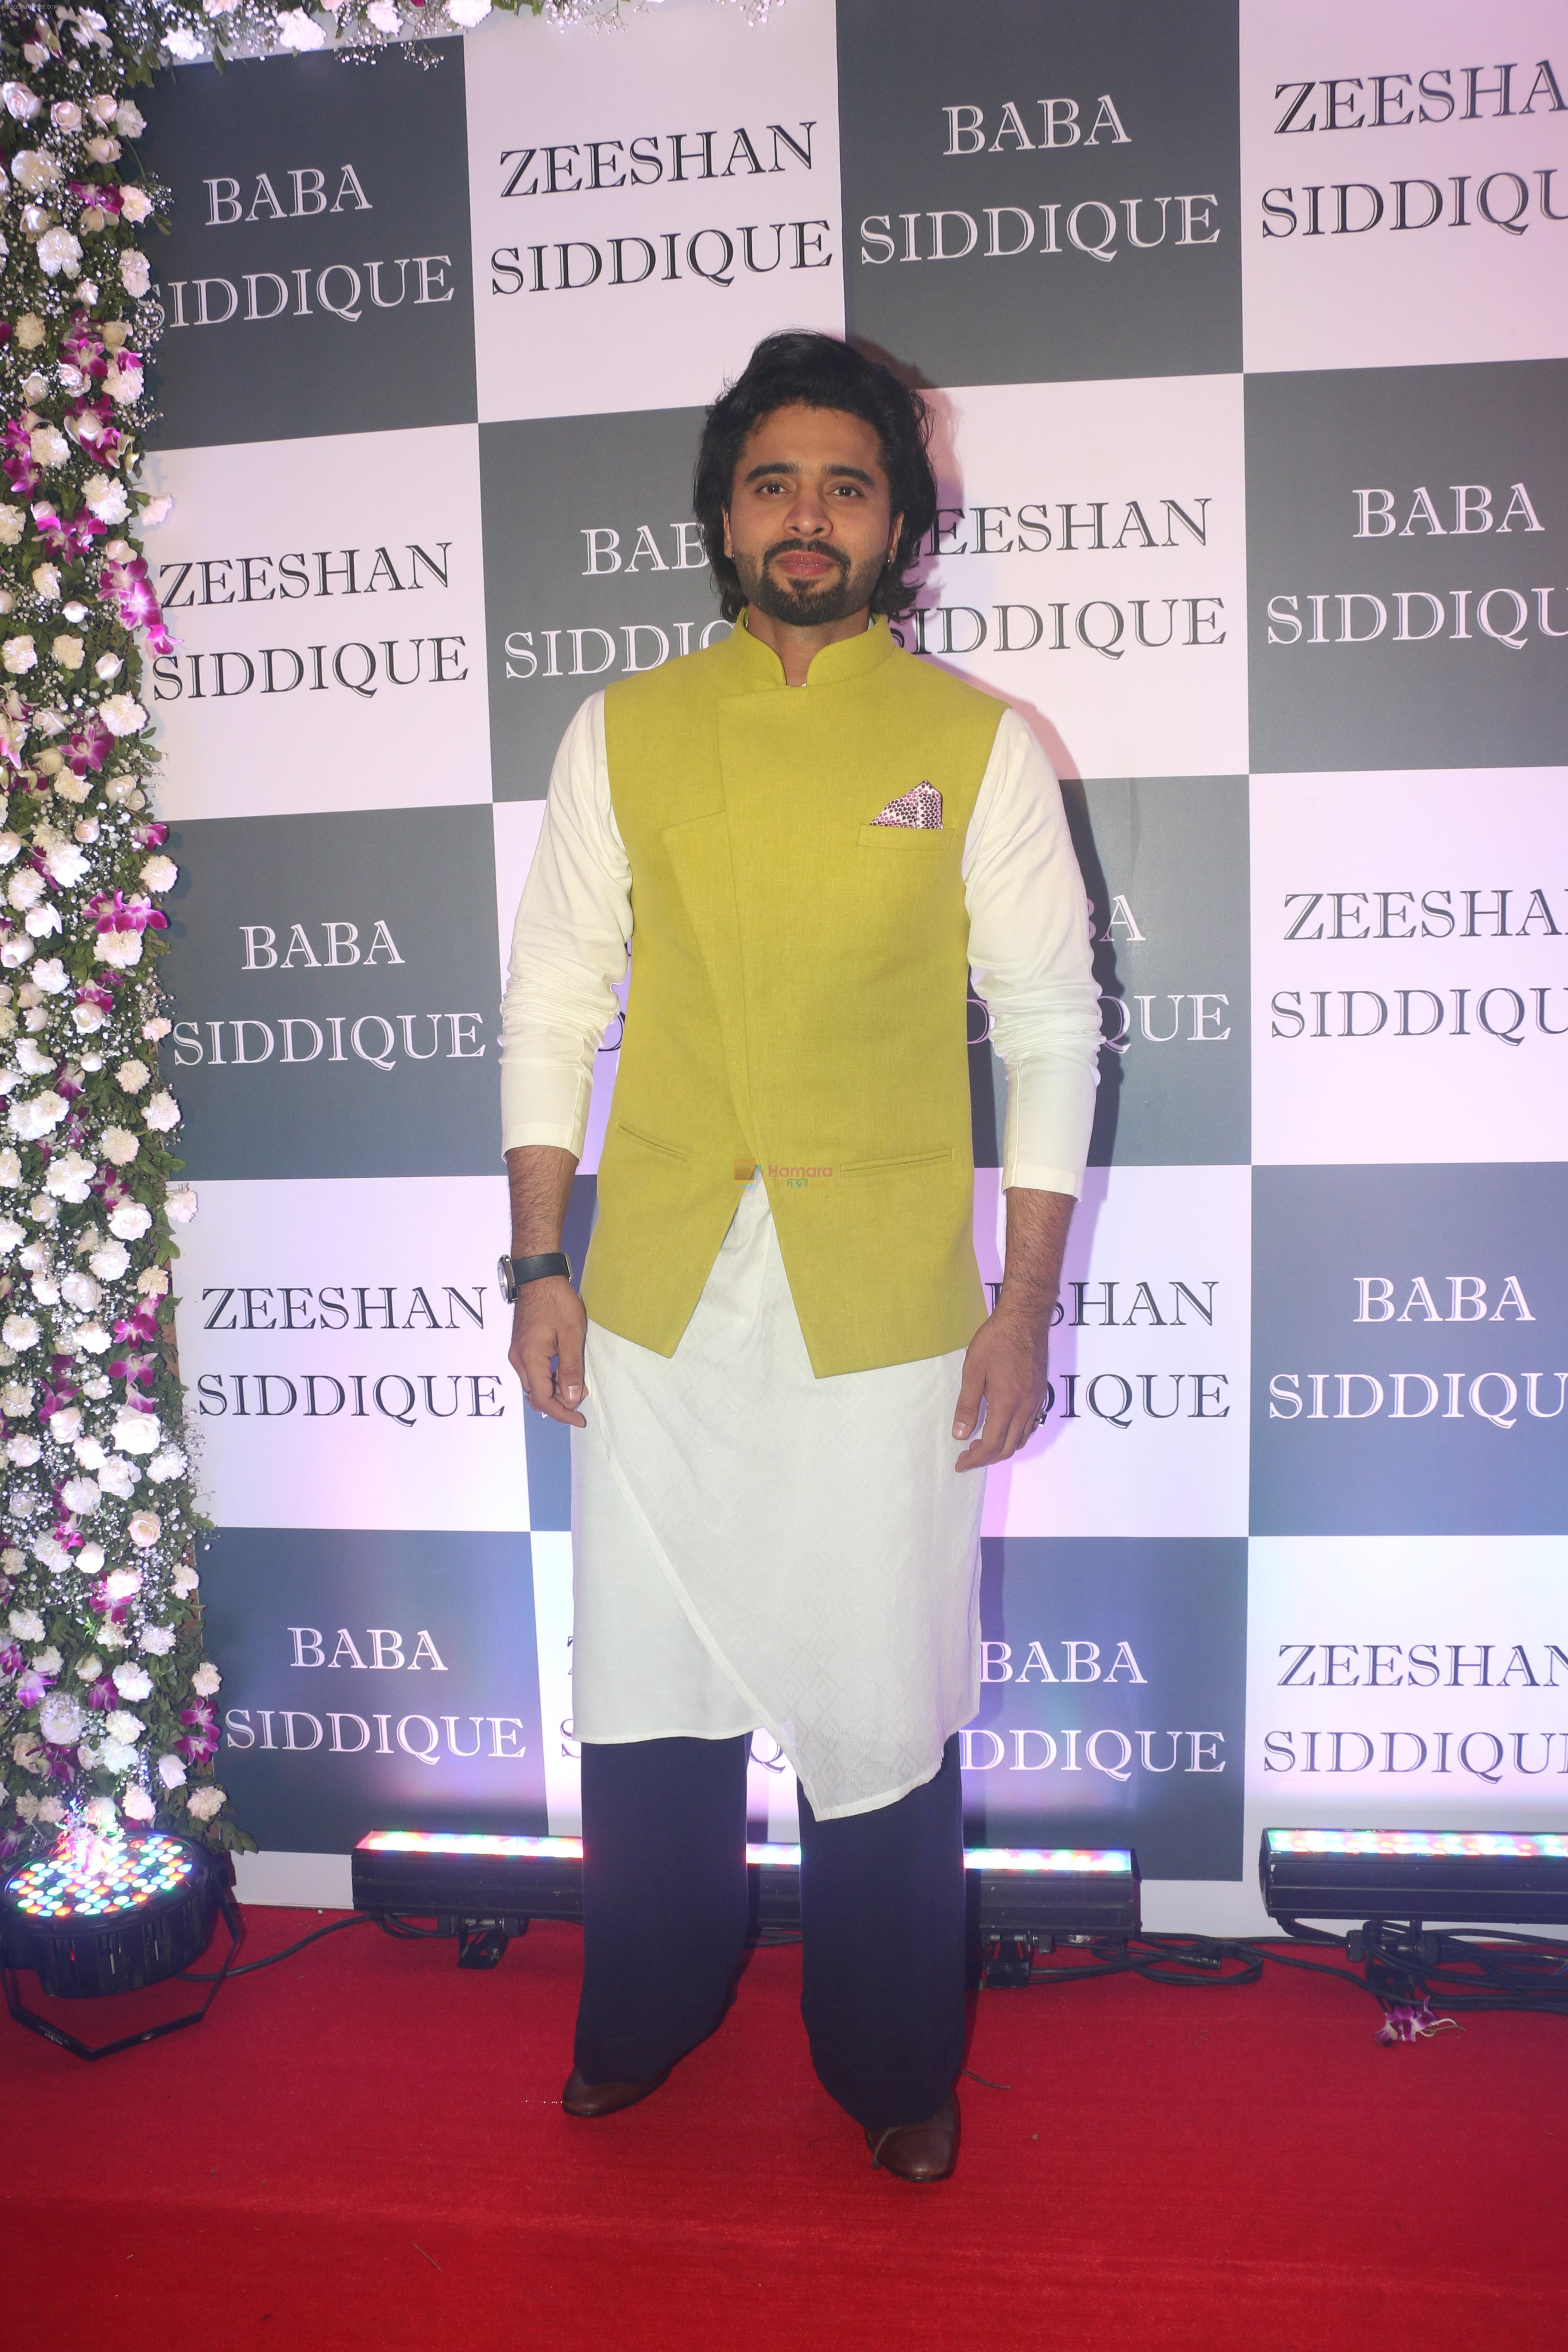 Jacky Bhagnani at Baba Siddiqui iftaar party in Taj Lands End bandra on 2nd June 2019